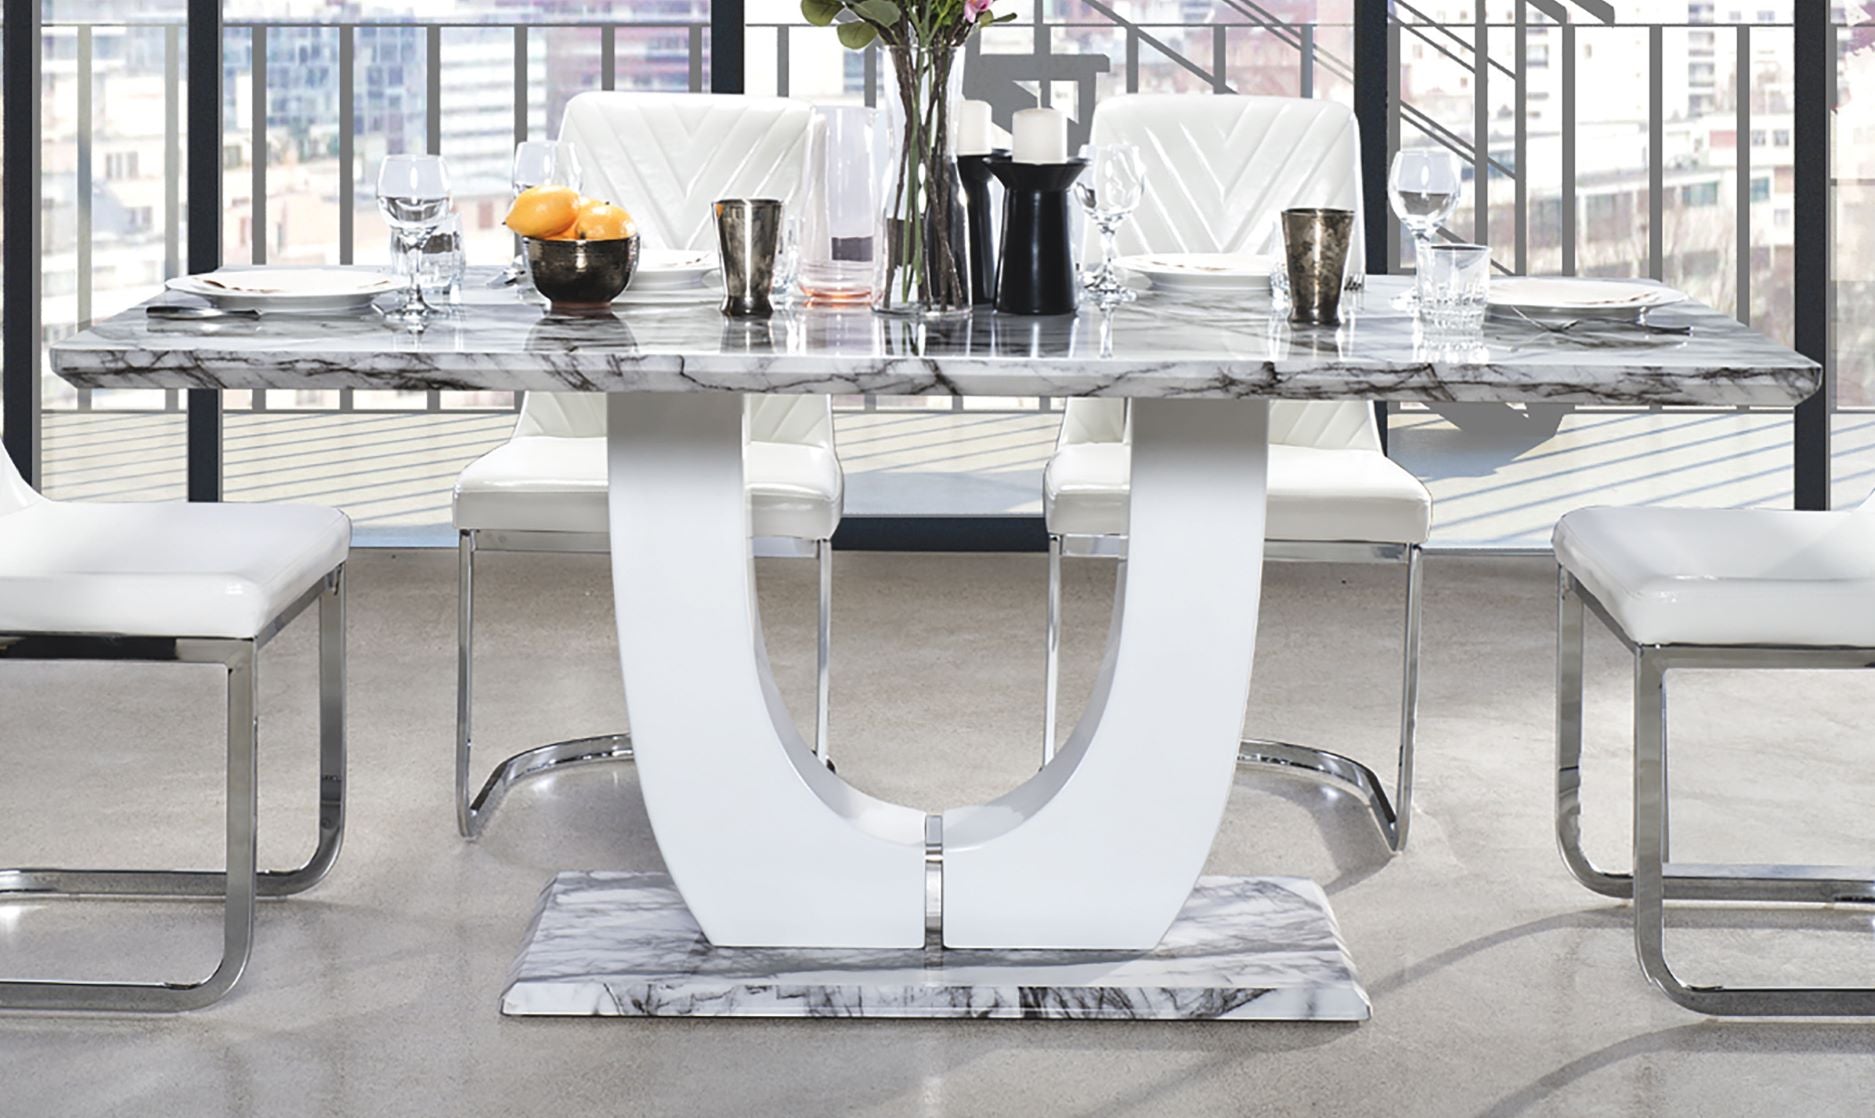 Felix Dining Table with Baxter White Chair Dining Collection 7409/738S4